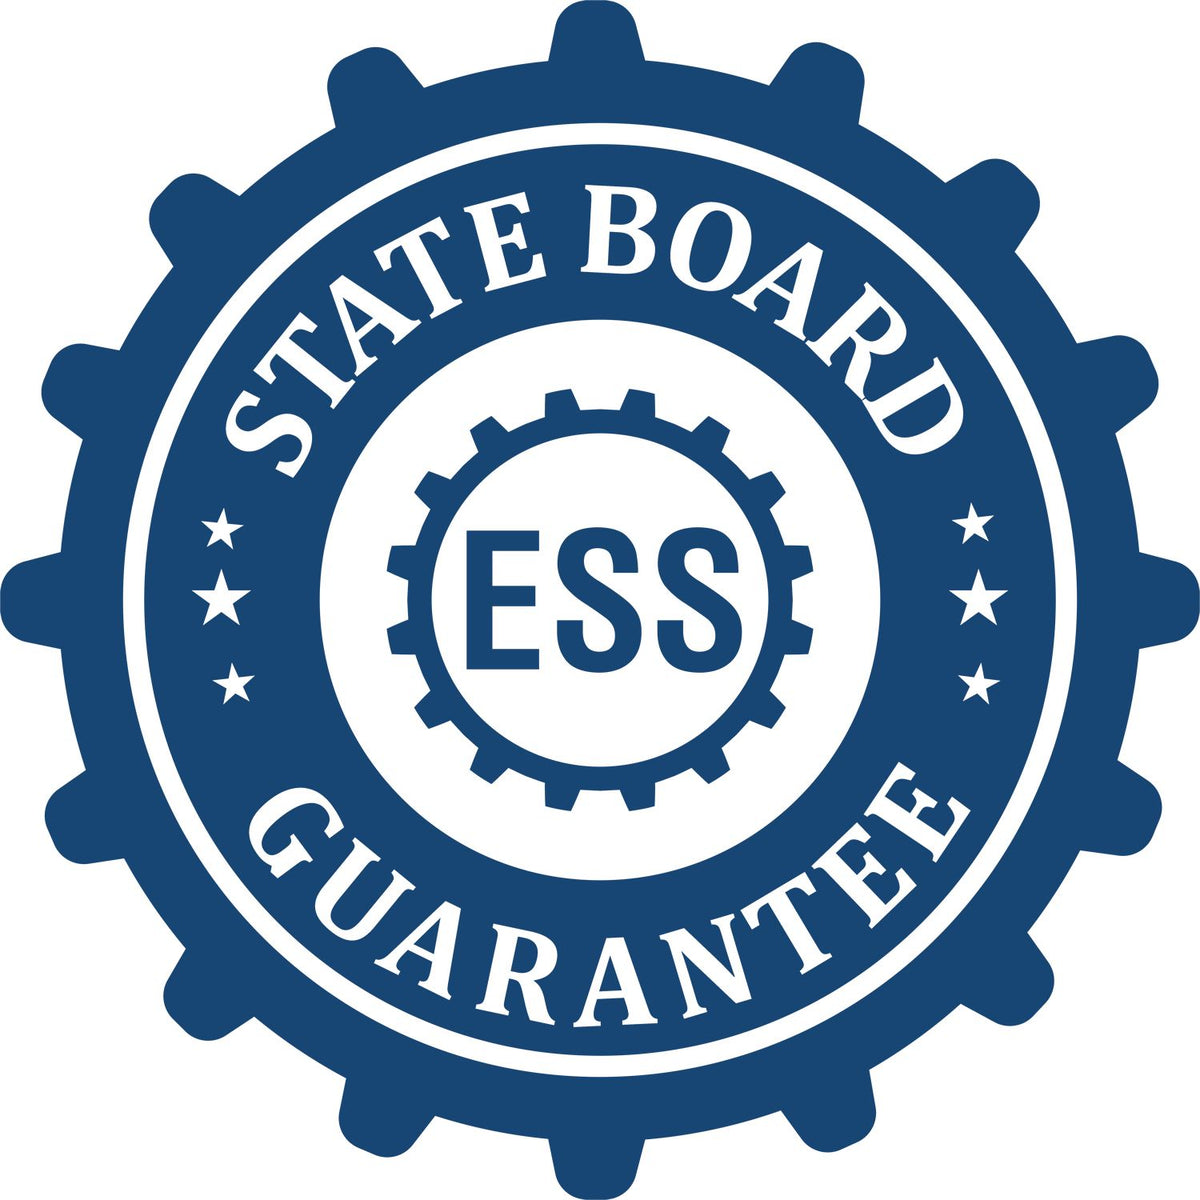 An emblem in a gear shape illustrating a state board guarantee for the Digital North Dakota PE Stamp and Electronic Seal for North Dakota Engineer product.